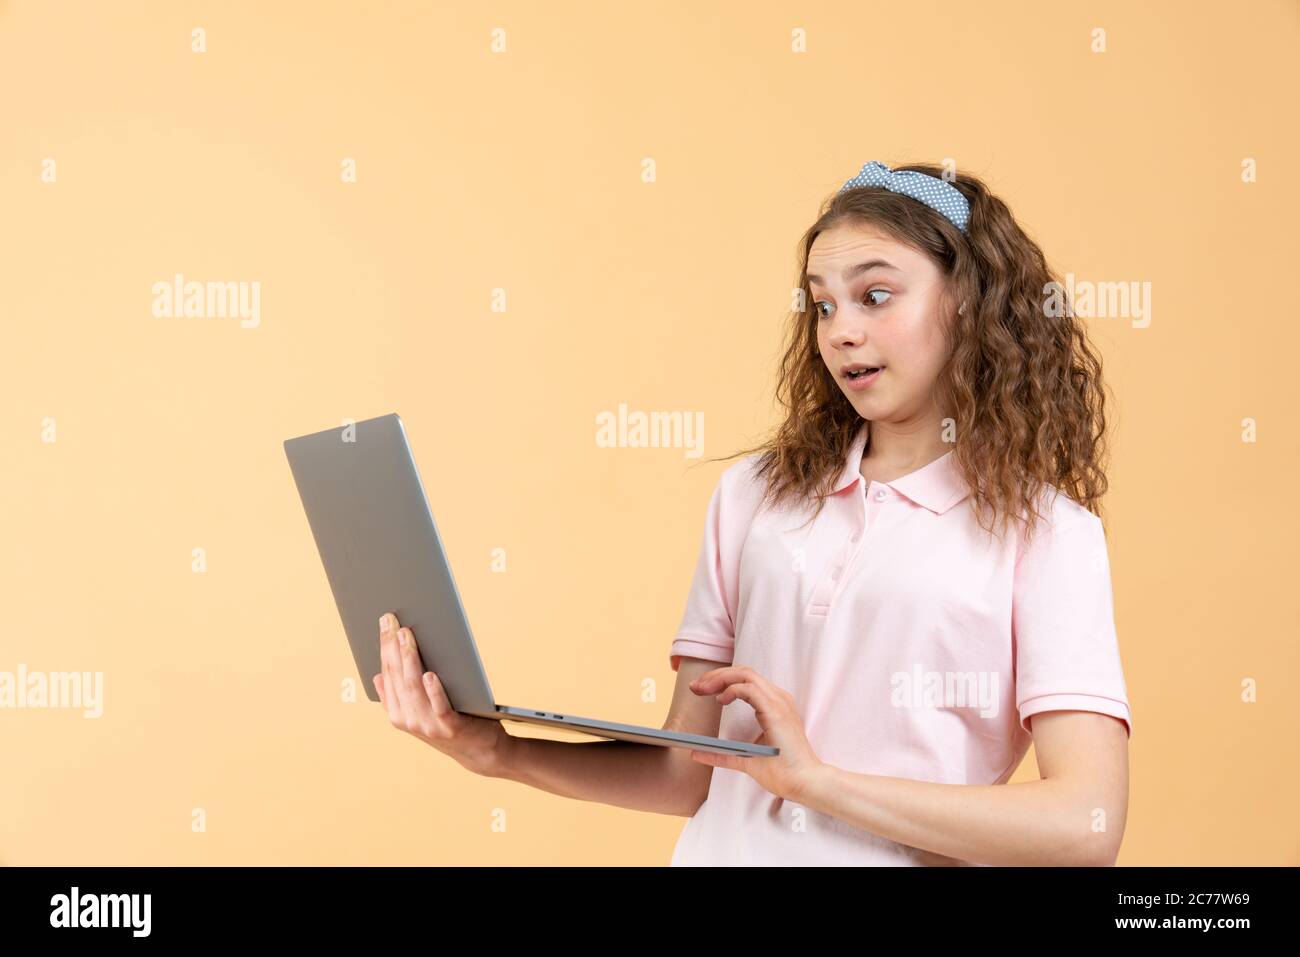 Portrait of frustrated computer user, teen girl with curly brunette hair in pink shirt looking at laptop, worried about software error, program bug Stock Photo